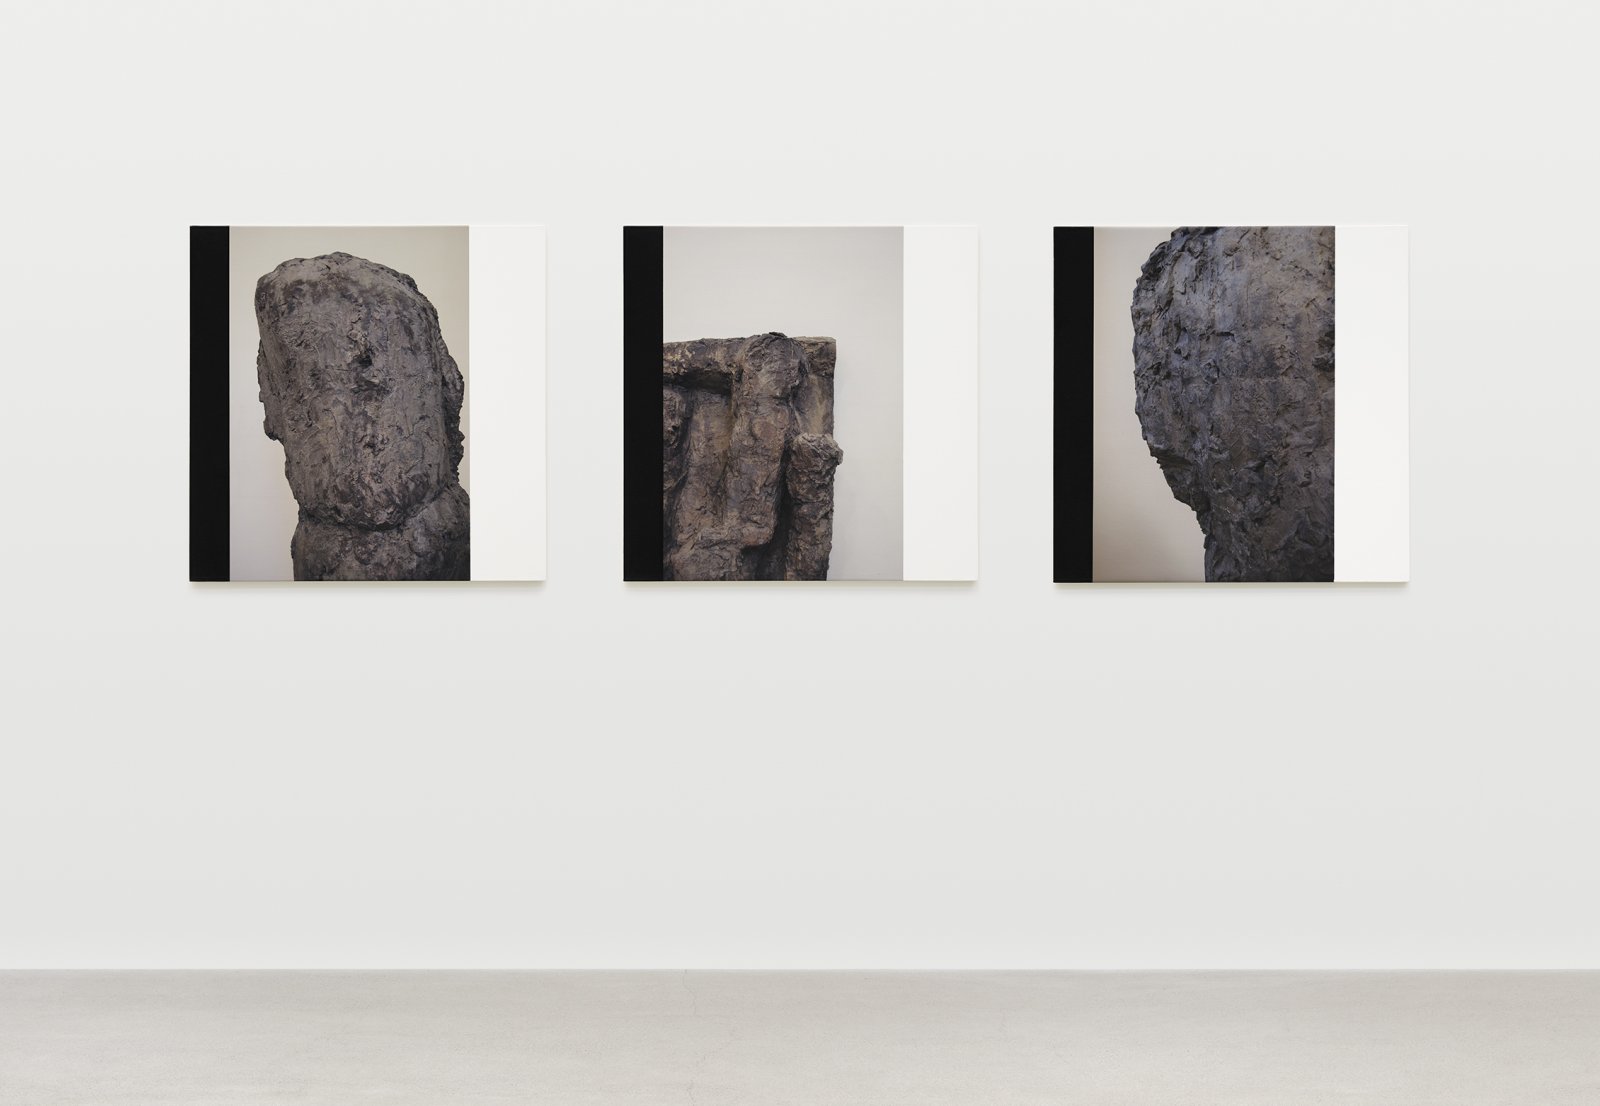 ​Ian Wallace, Untitled (The Hans Josephsohn Series), 2009, photolaminate and acrylic on canvas, triptych, each 36 x 36 in. (92 x 92 cm) by Ian Wallace